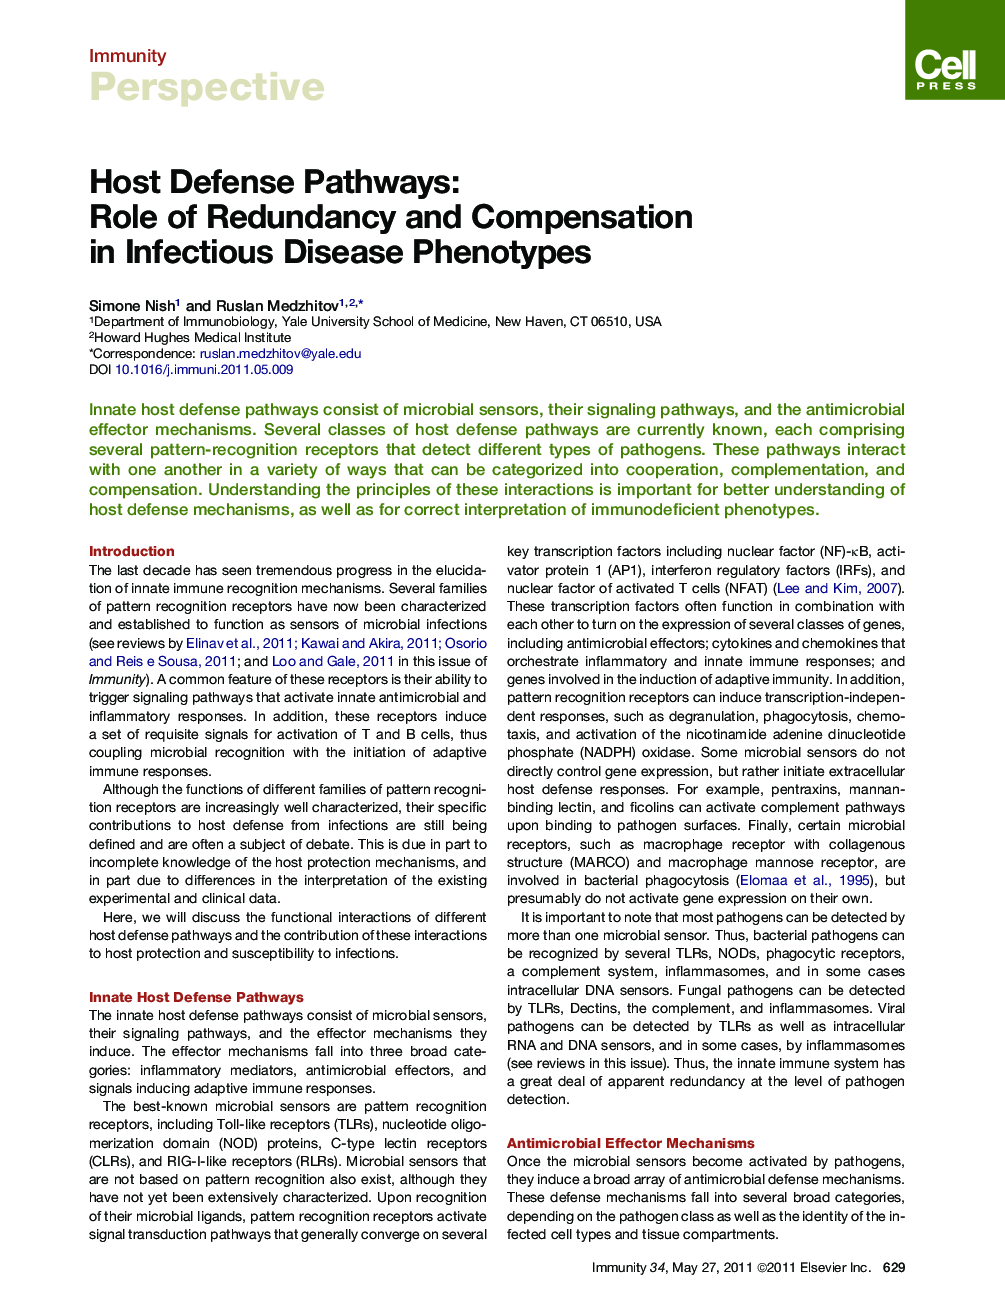 Host Defense Pathways: Role of Redundancy and Compensation in Infectious Disease Phenotypes